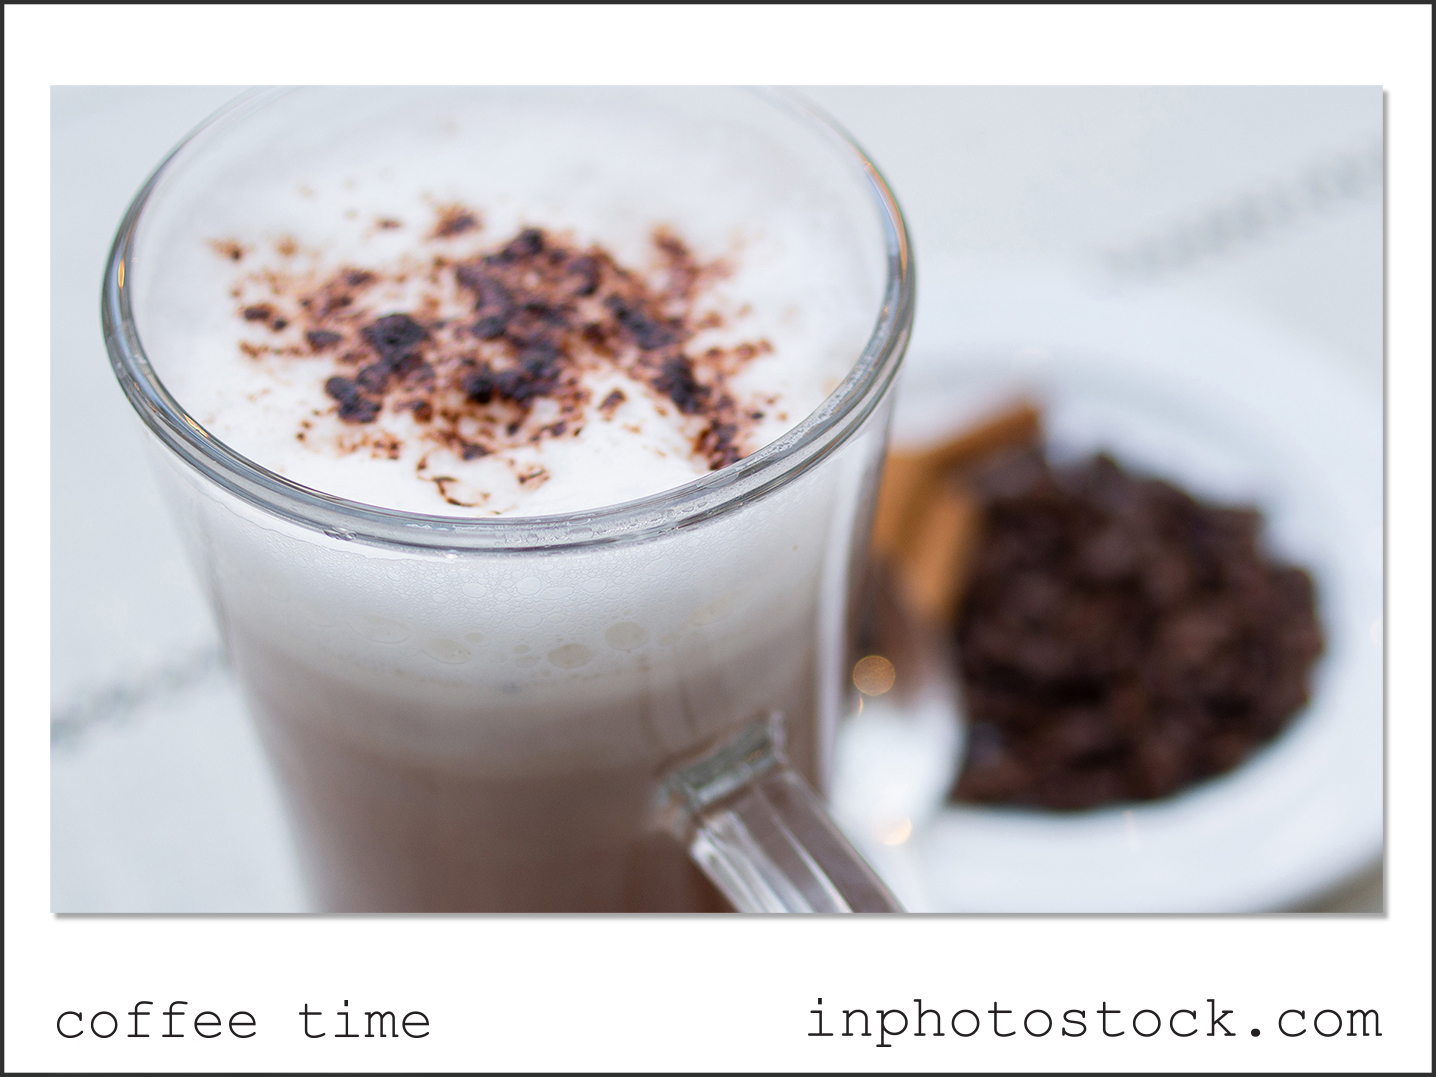 coffee time photo of the day inphotostock